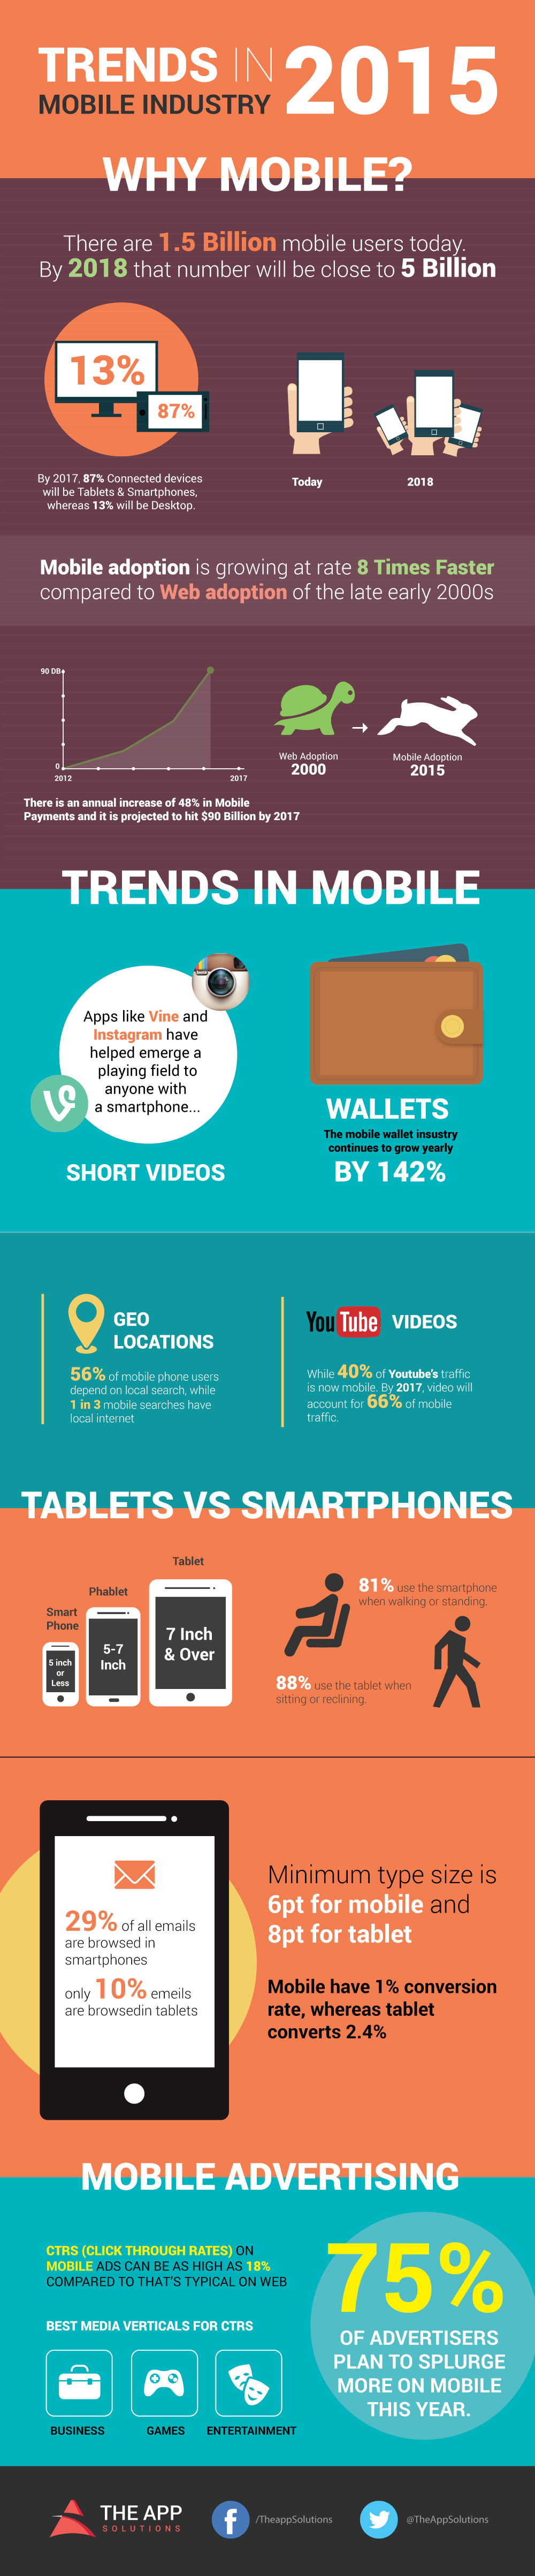 mobile trends 2015